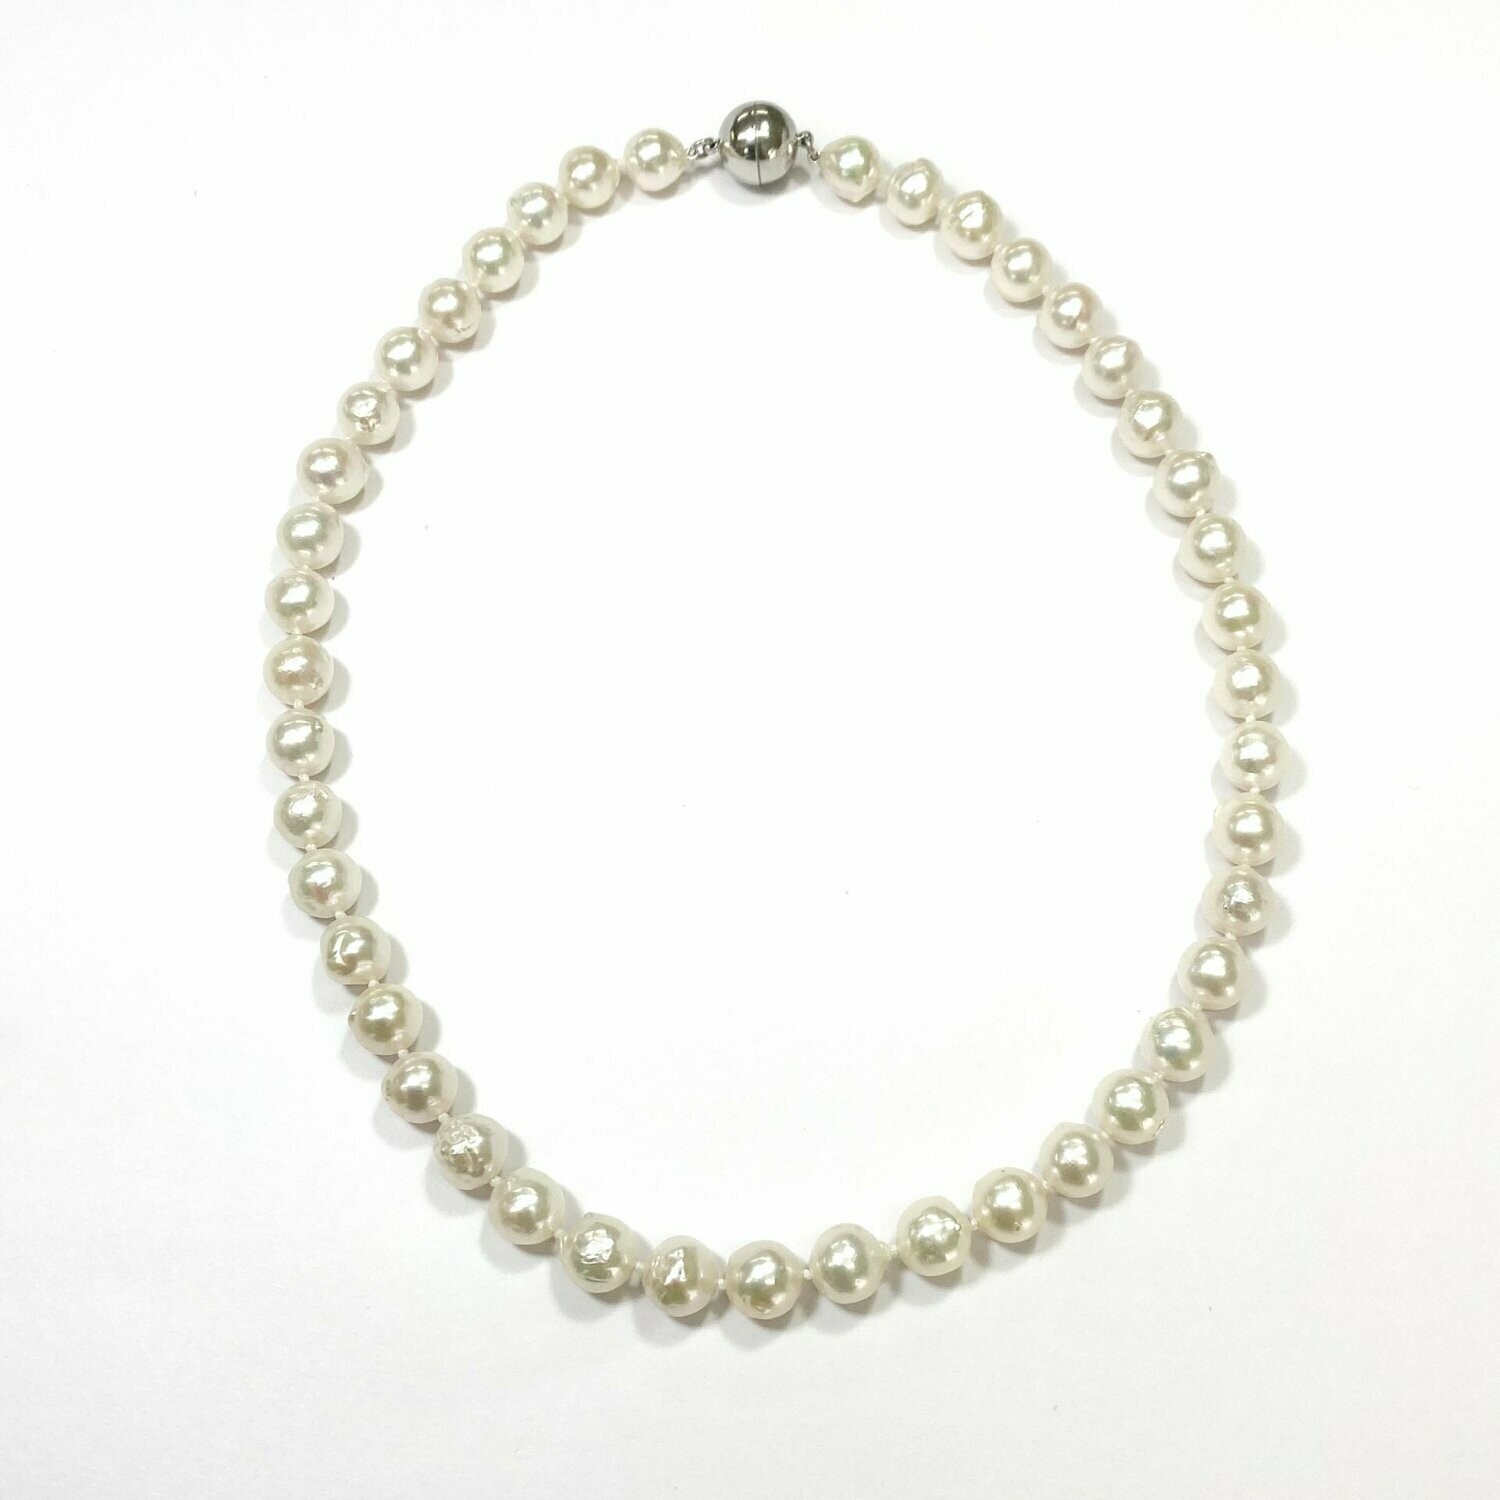 Saltwater Baroque Pearl Necklace (Akoya)